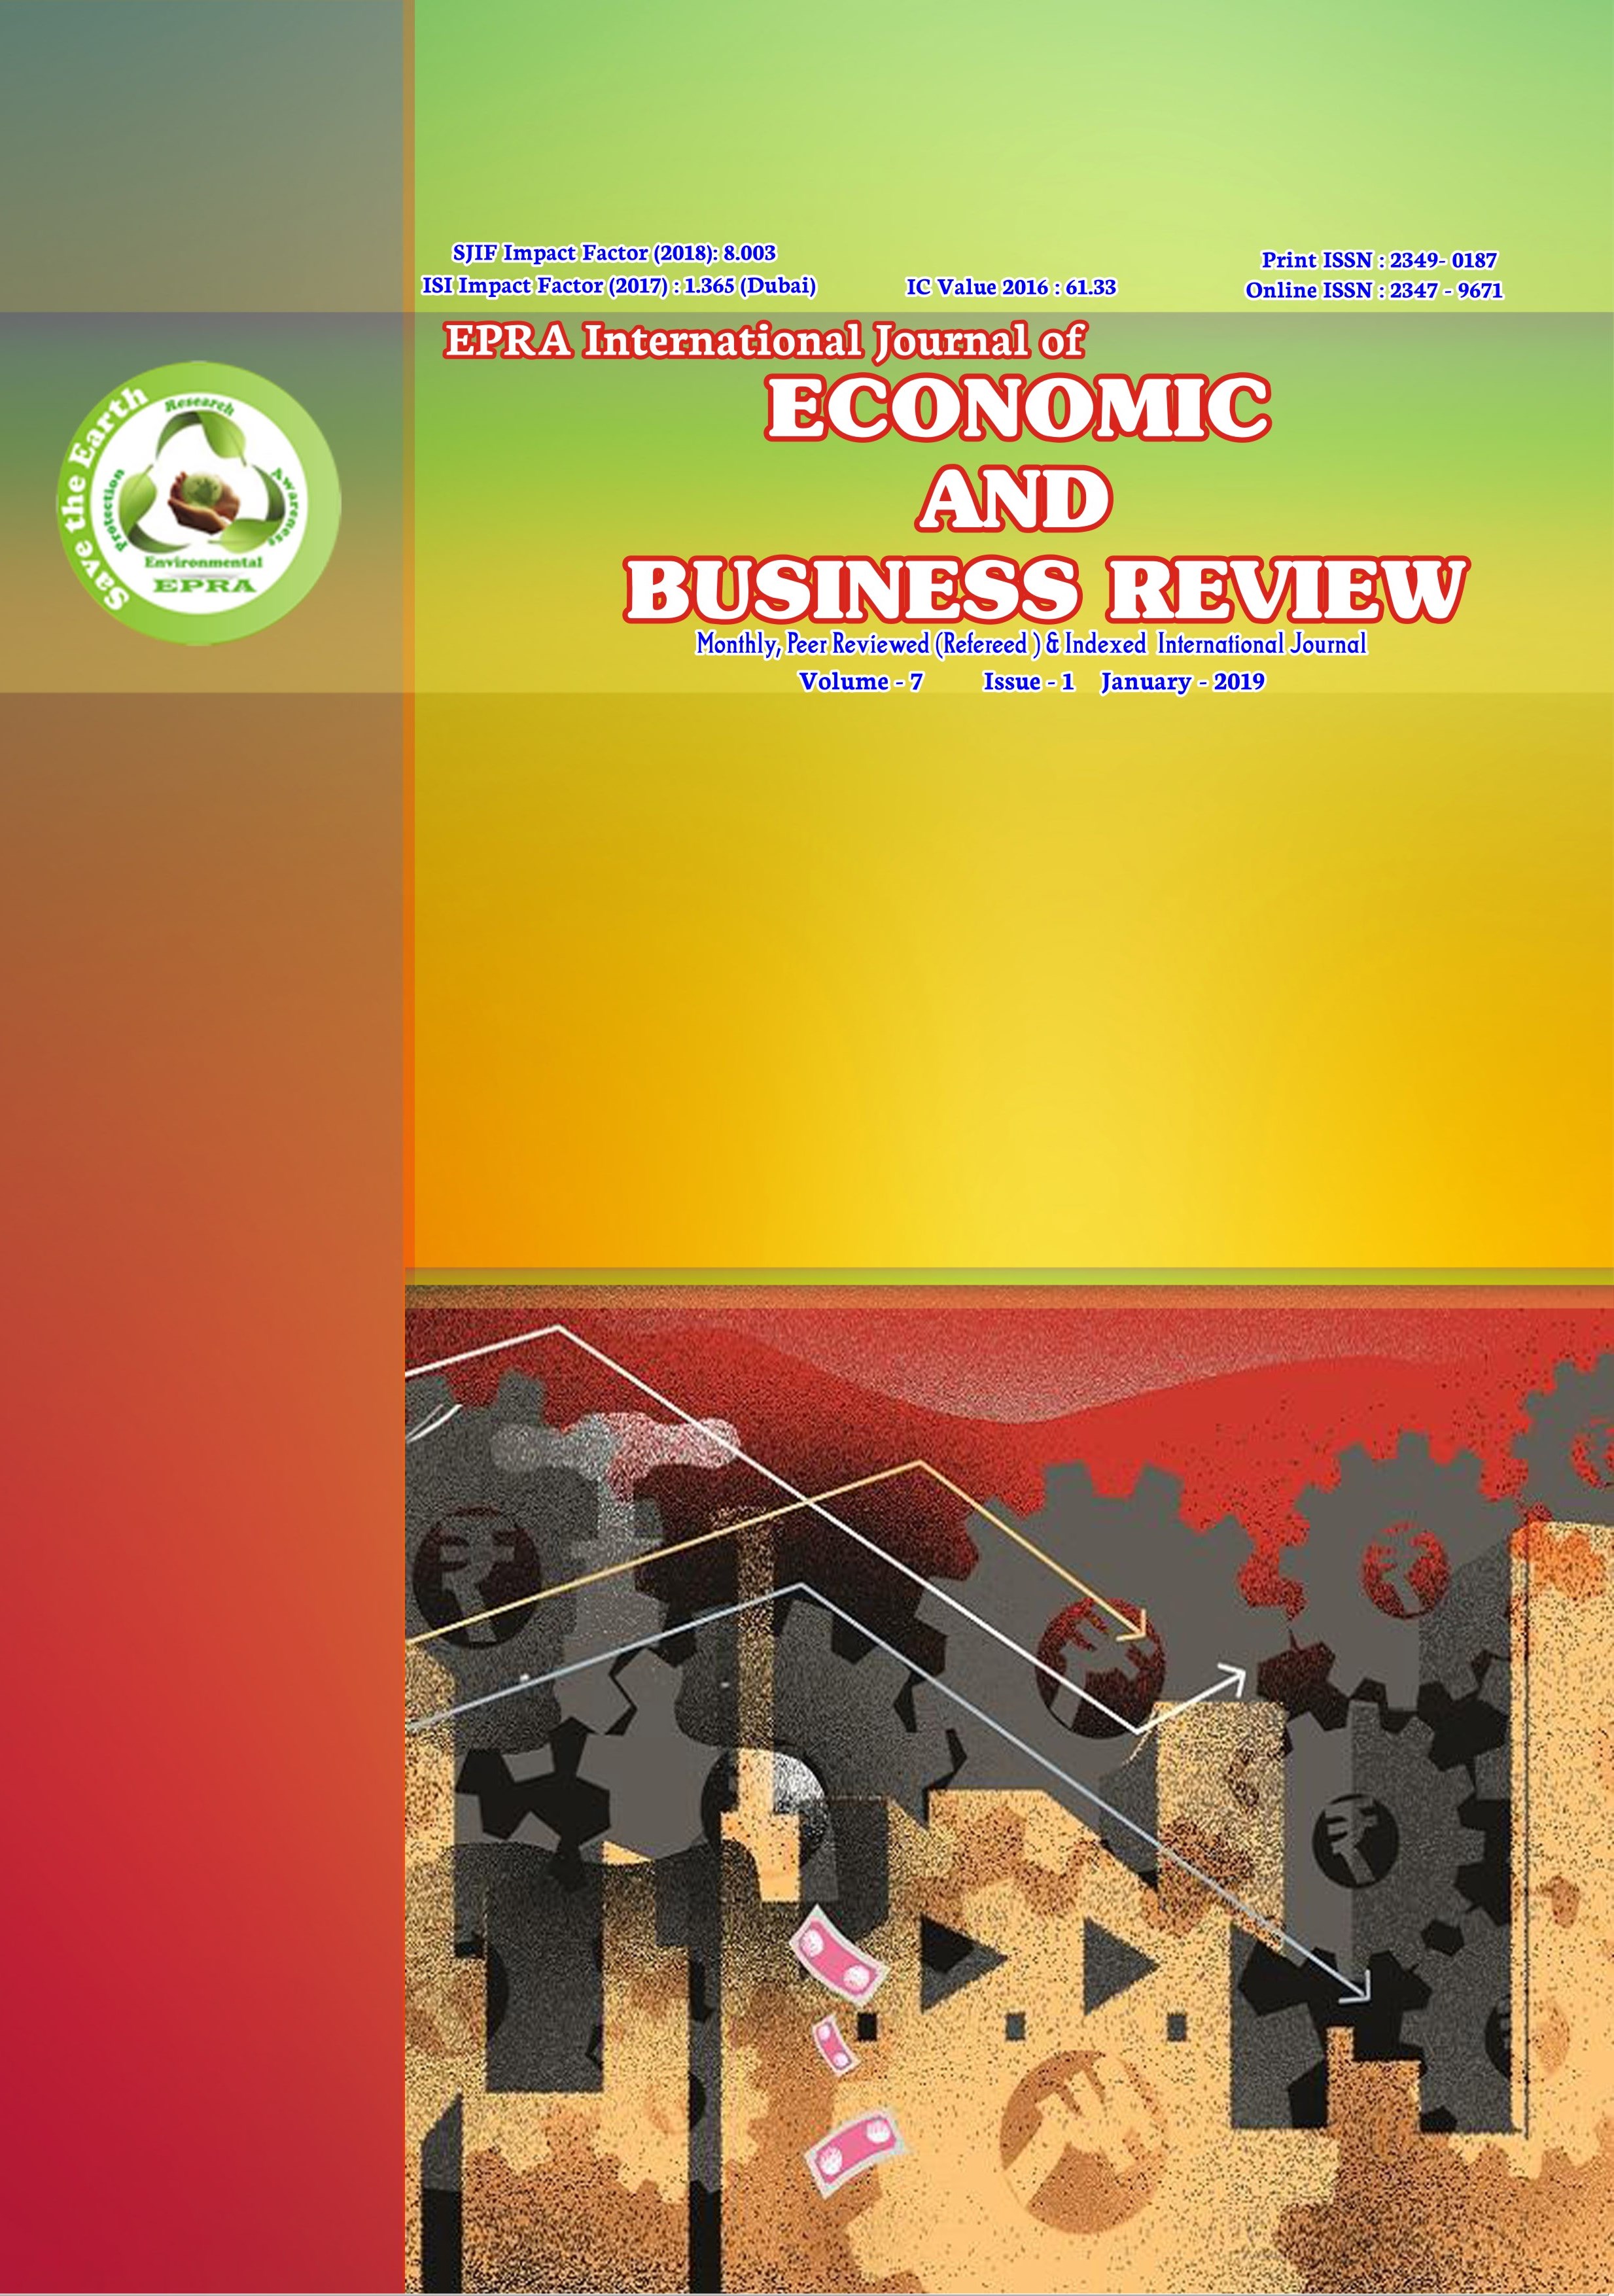 EPRA INTERNATIONAL JOURNAL OF ECONOMIC AND BUSINESS REVIEW